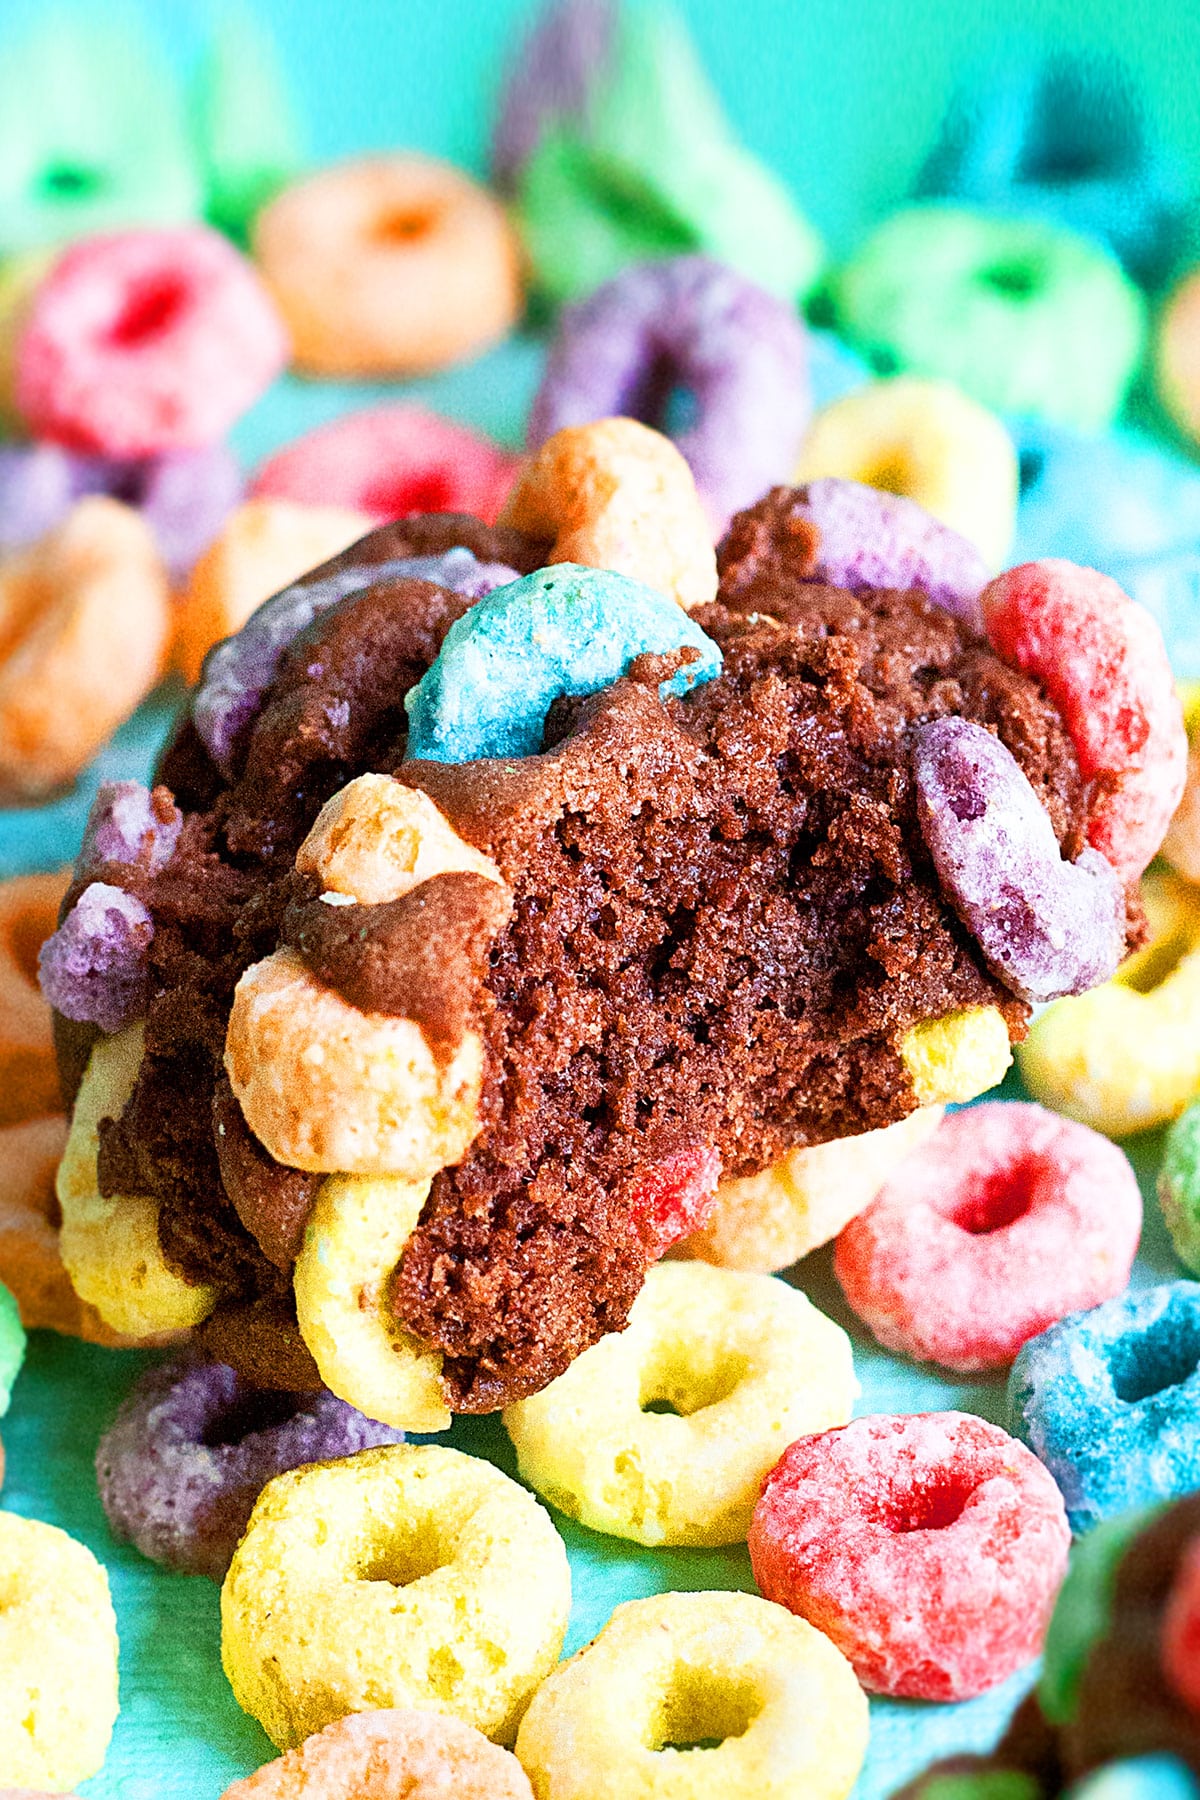 Partially Eaten Chocolate Cookie With Rainbow Froot Loops on a Colorful Background